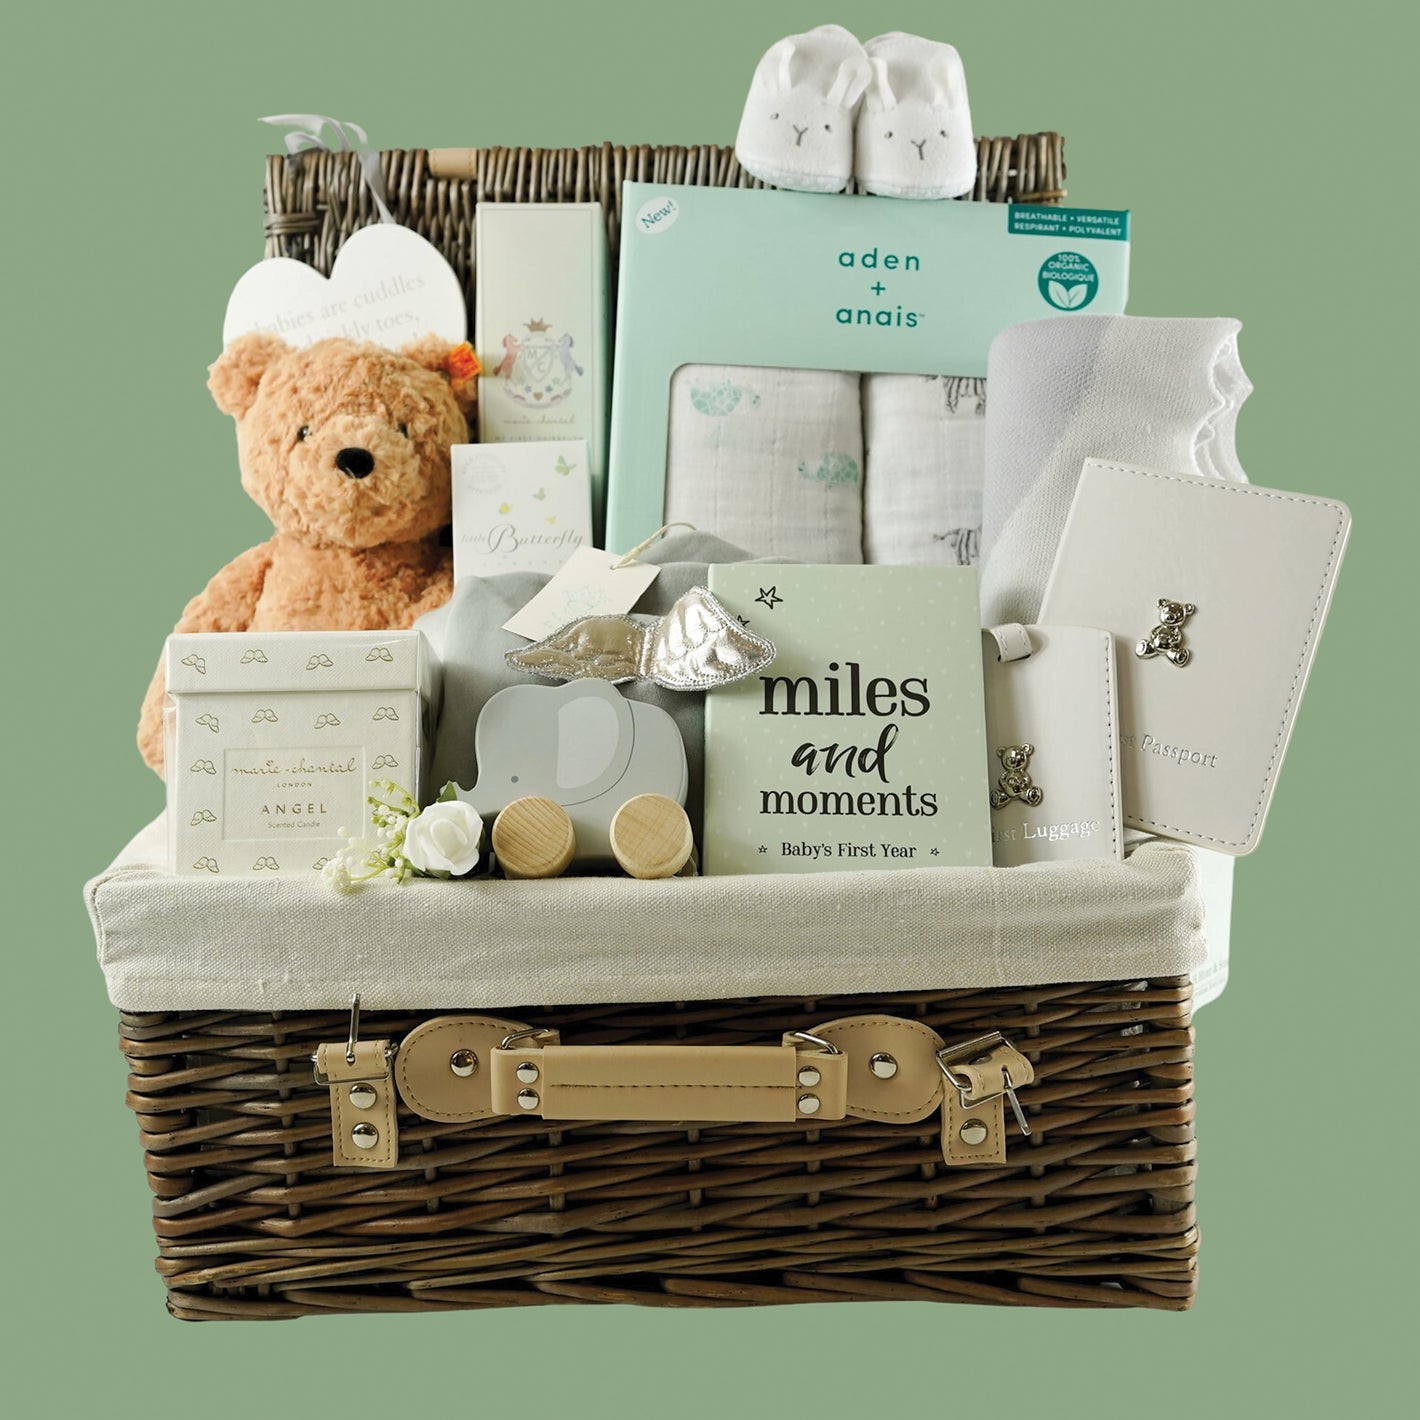 Our Green House Luxury Baby Gift Basket for Boy or Girl, Huge, High End Gifts, Group Office Baby Showers, Corporate, Unisex, Deluxe, Amazing Organic Box | Our Green